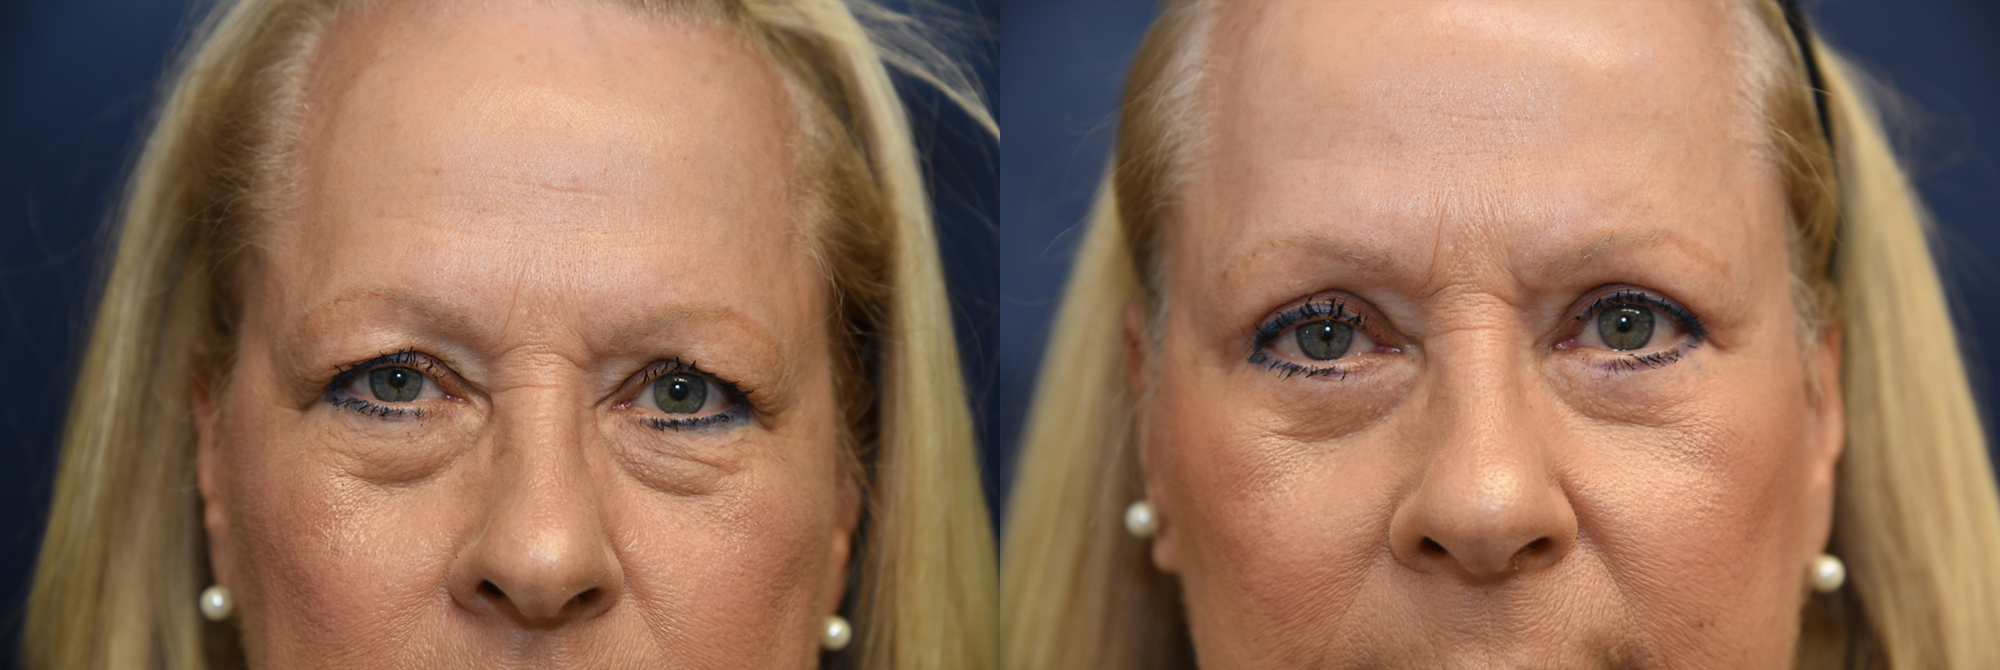 Facelift Before and After Photo by Dr. Leveque of Gulf Coast Plastic Surgery in Pensacola, FL